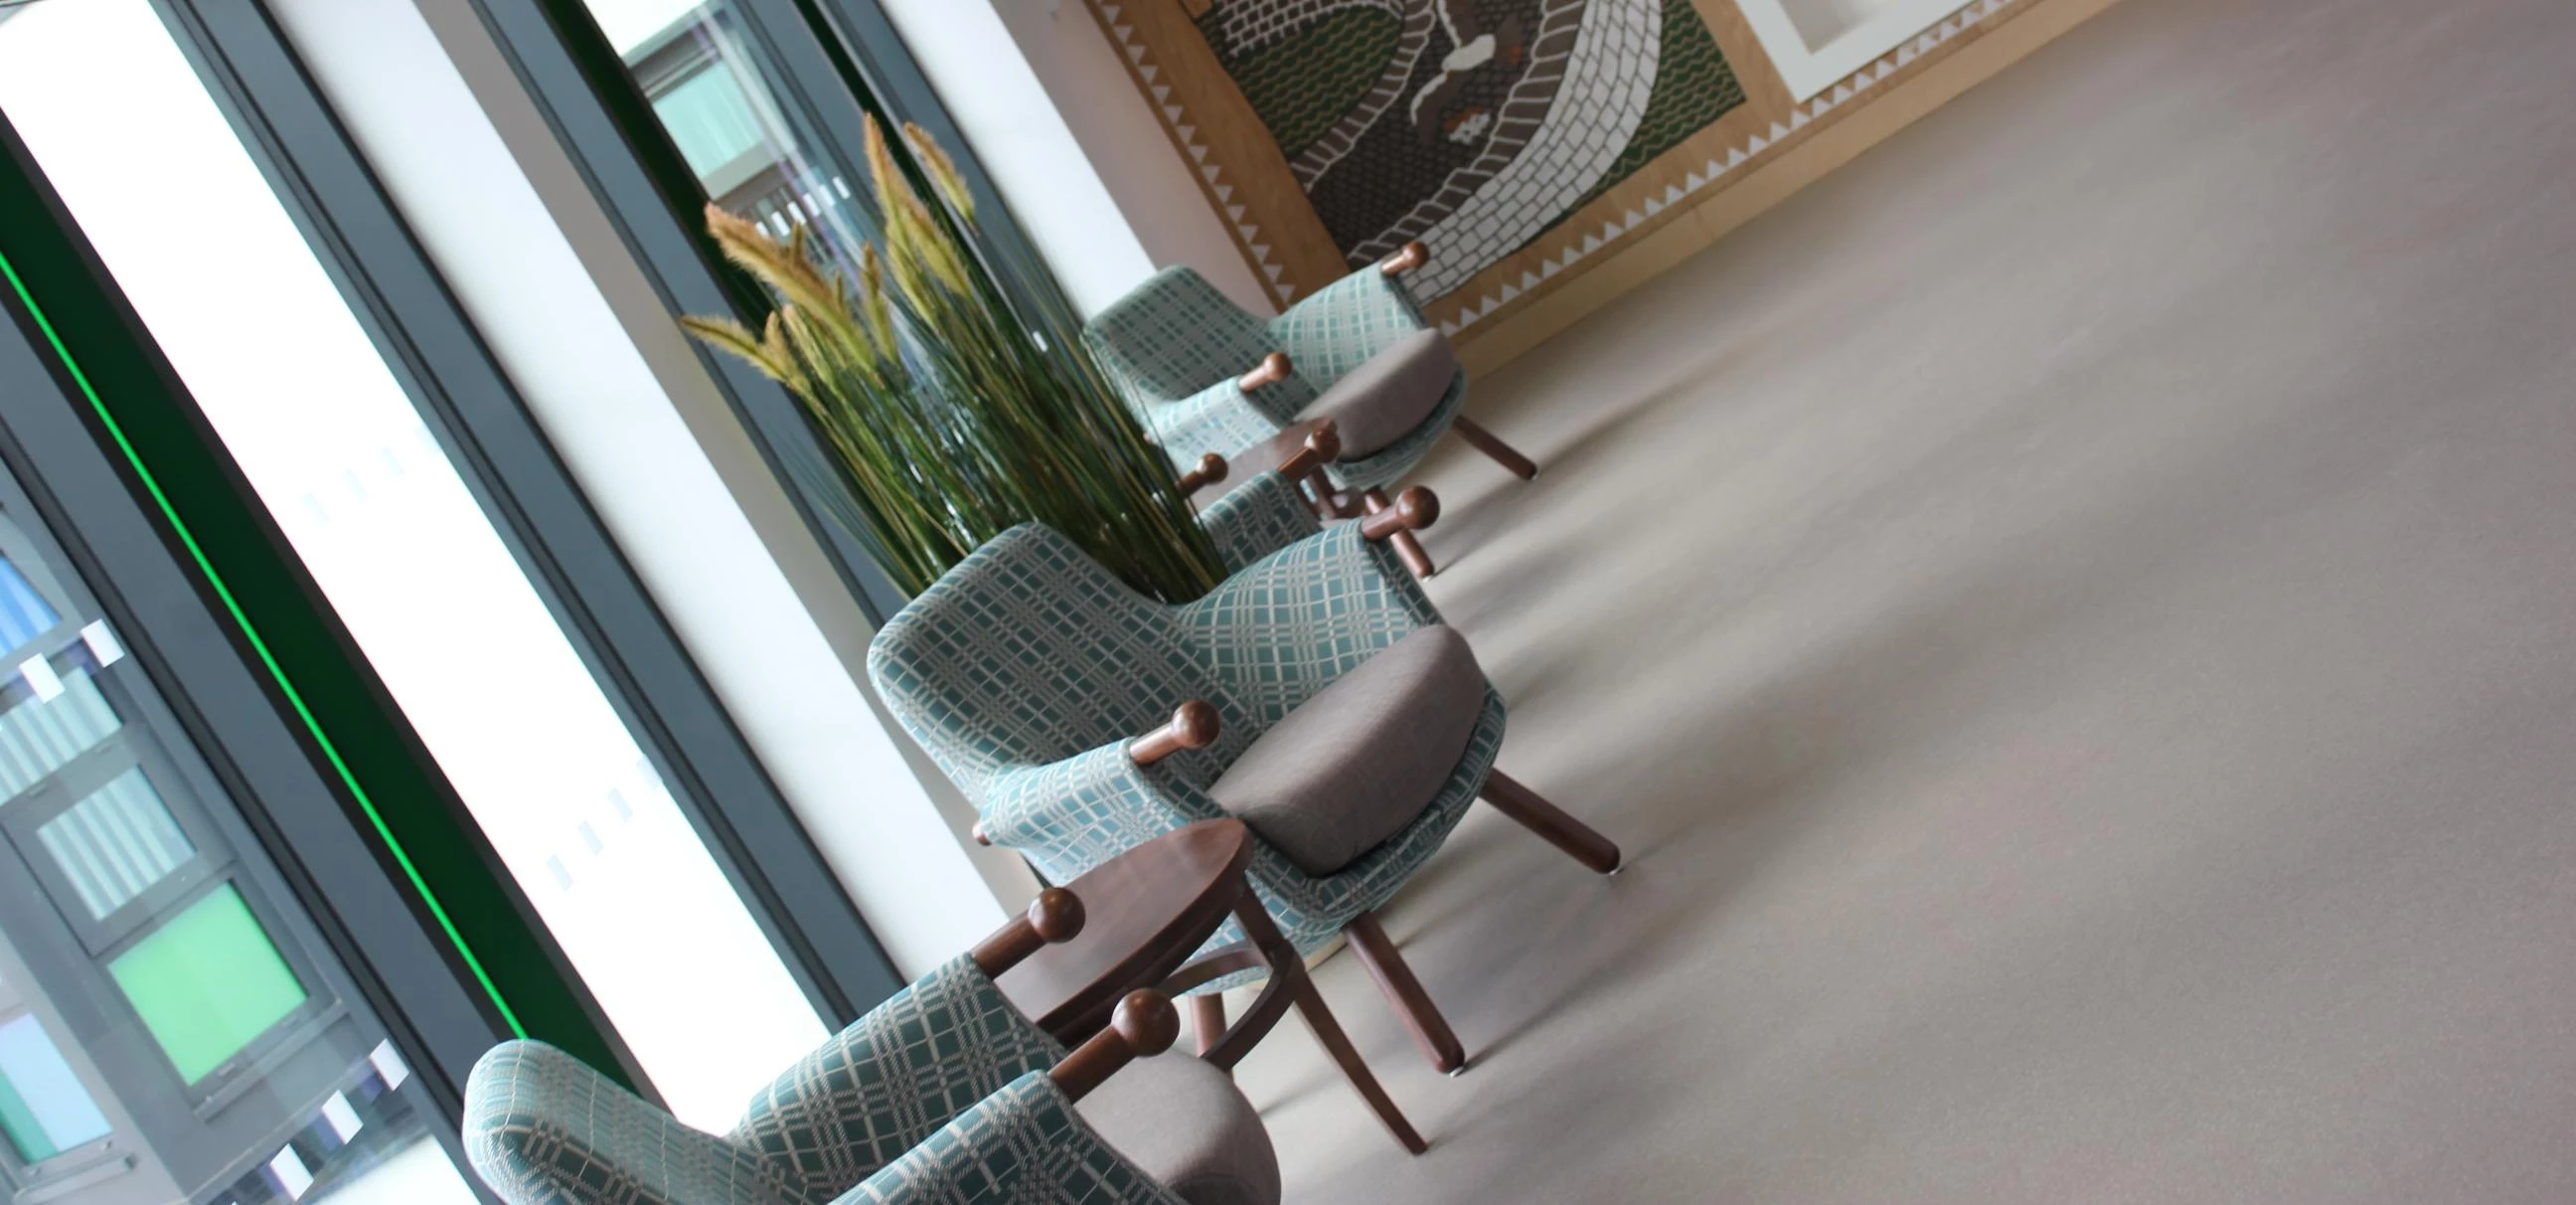 Teal LIVING brings innovation in furniture design and contemporary spaces.